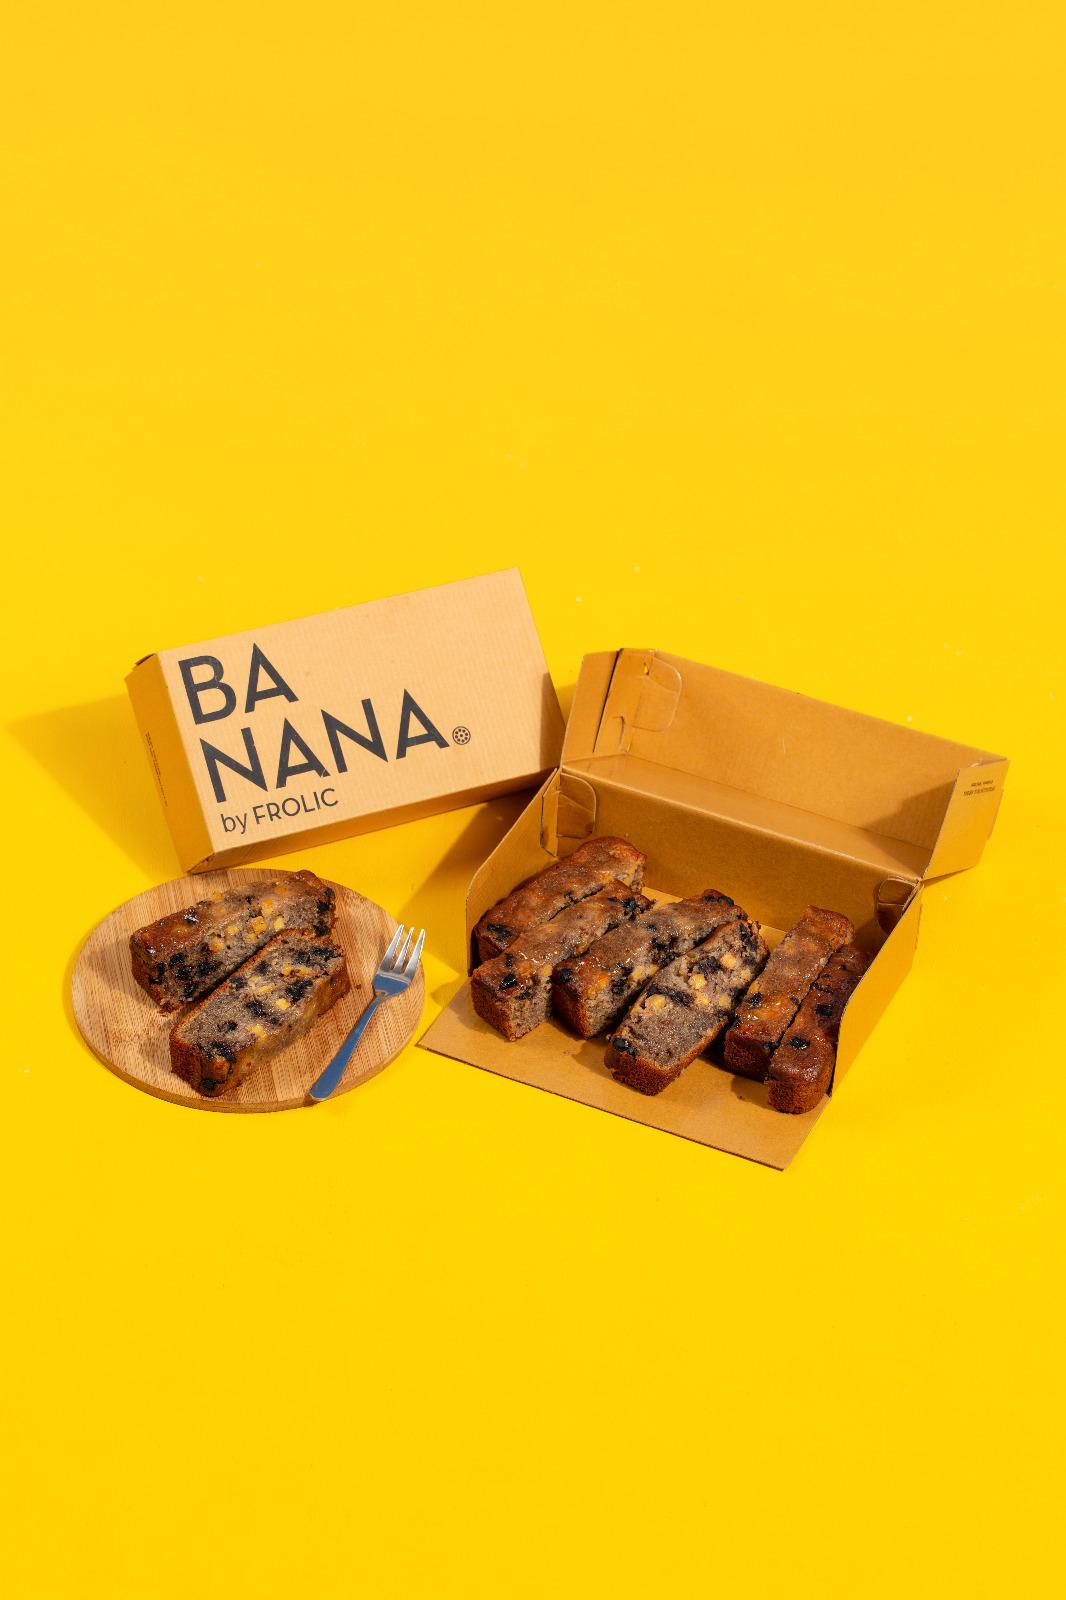 Frolic Banana: Leading the Way in Sustainable Baking with Carbon Offset Commitment